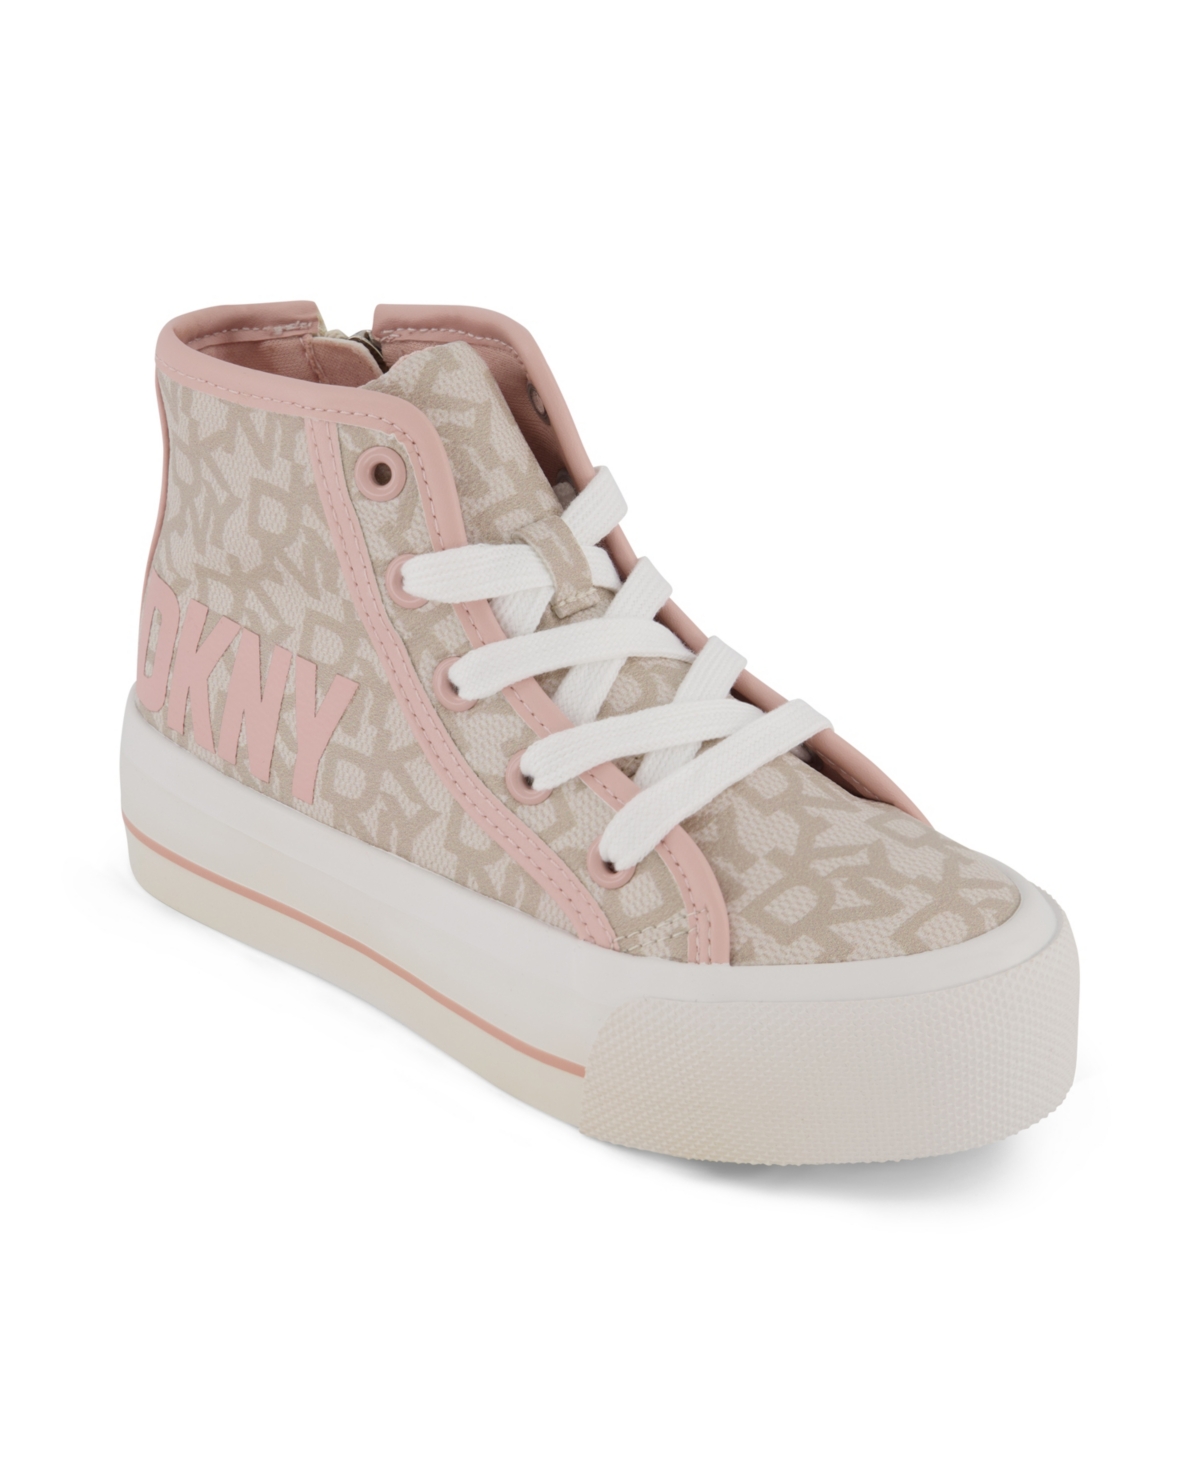 DKNY BIG GIRLS PLATFORM HIGH TOP LACE-UP SNEAKERS